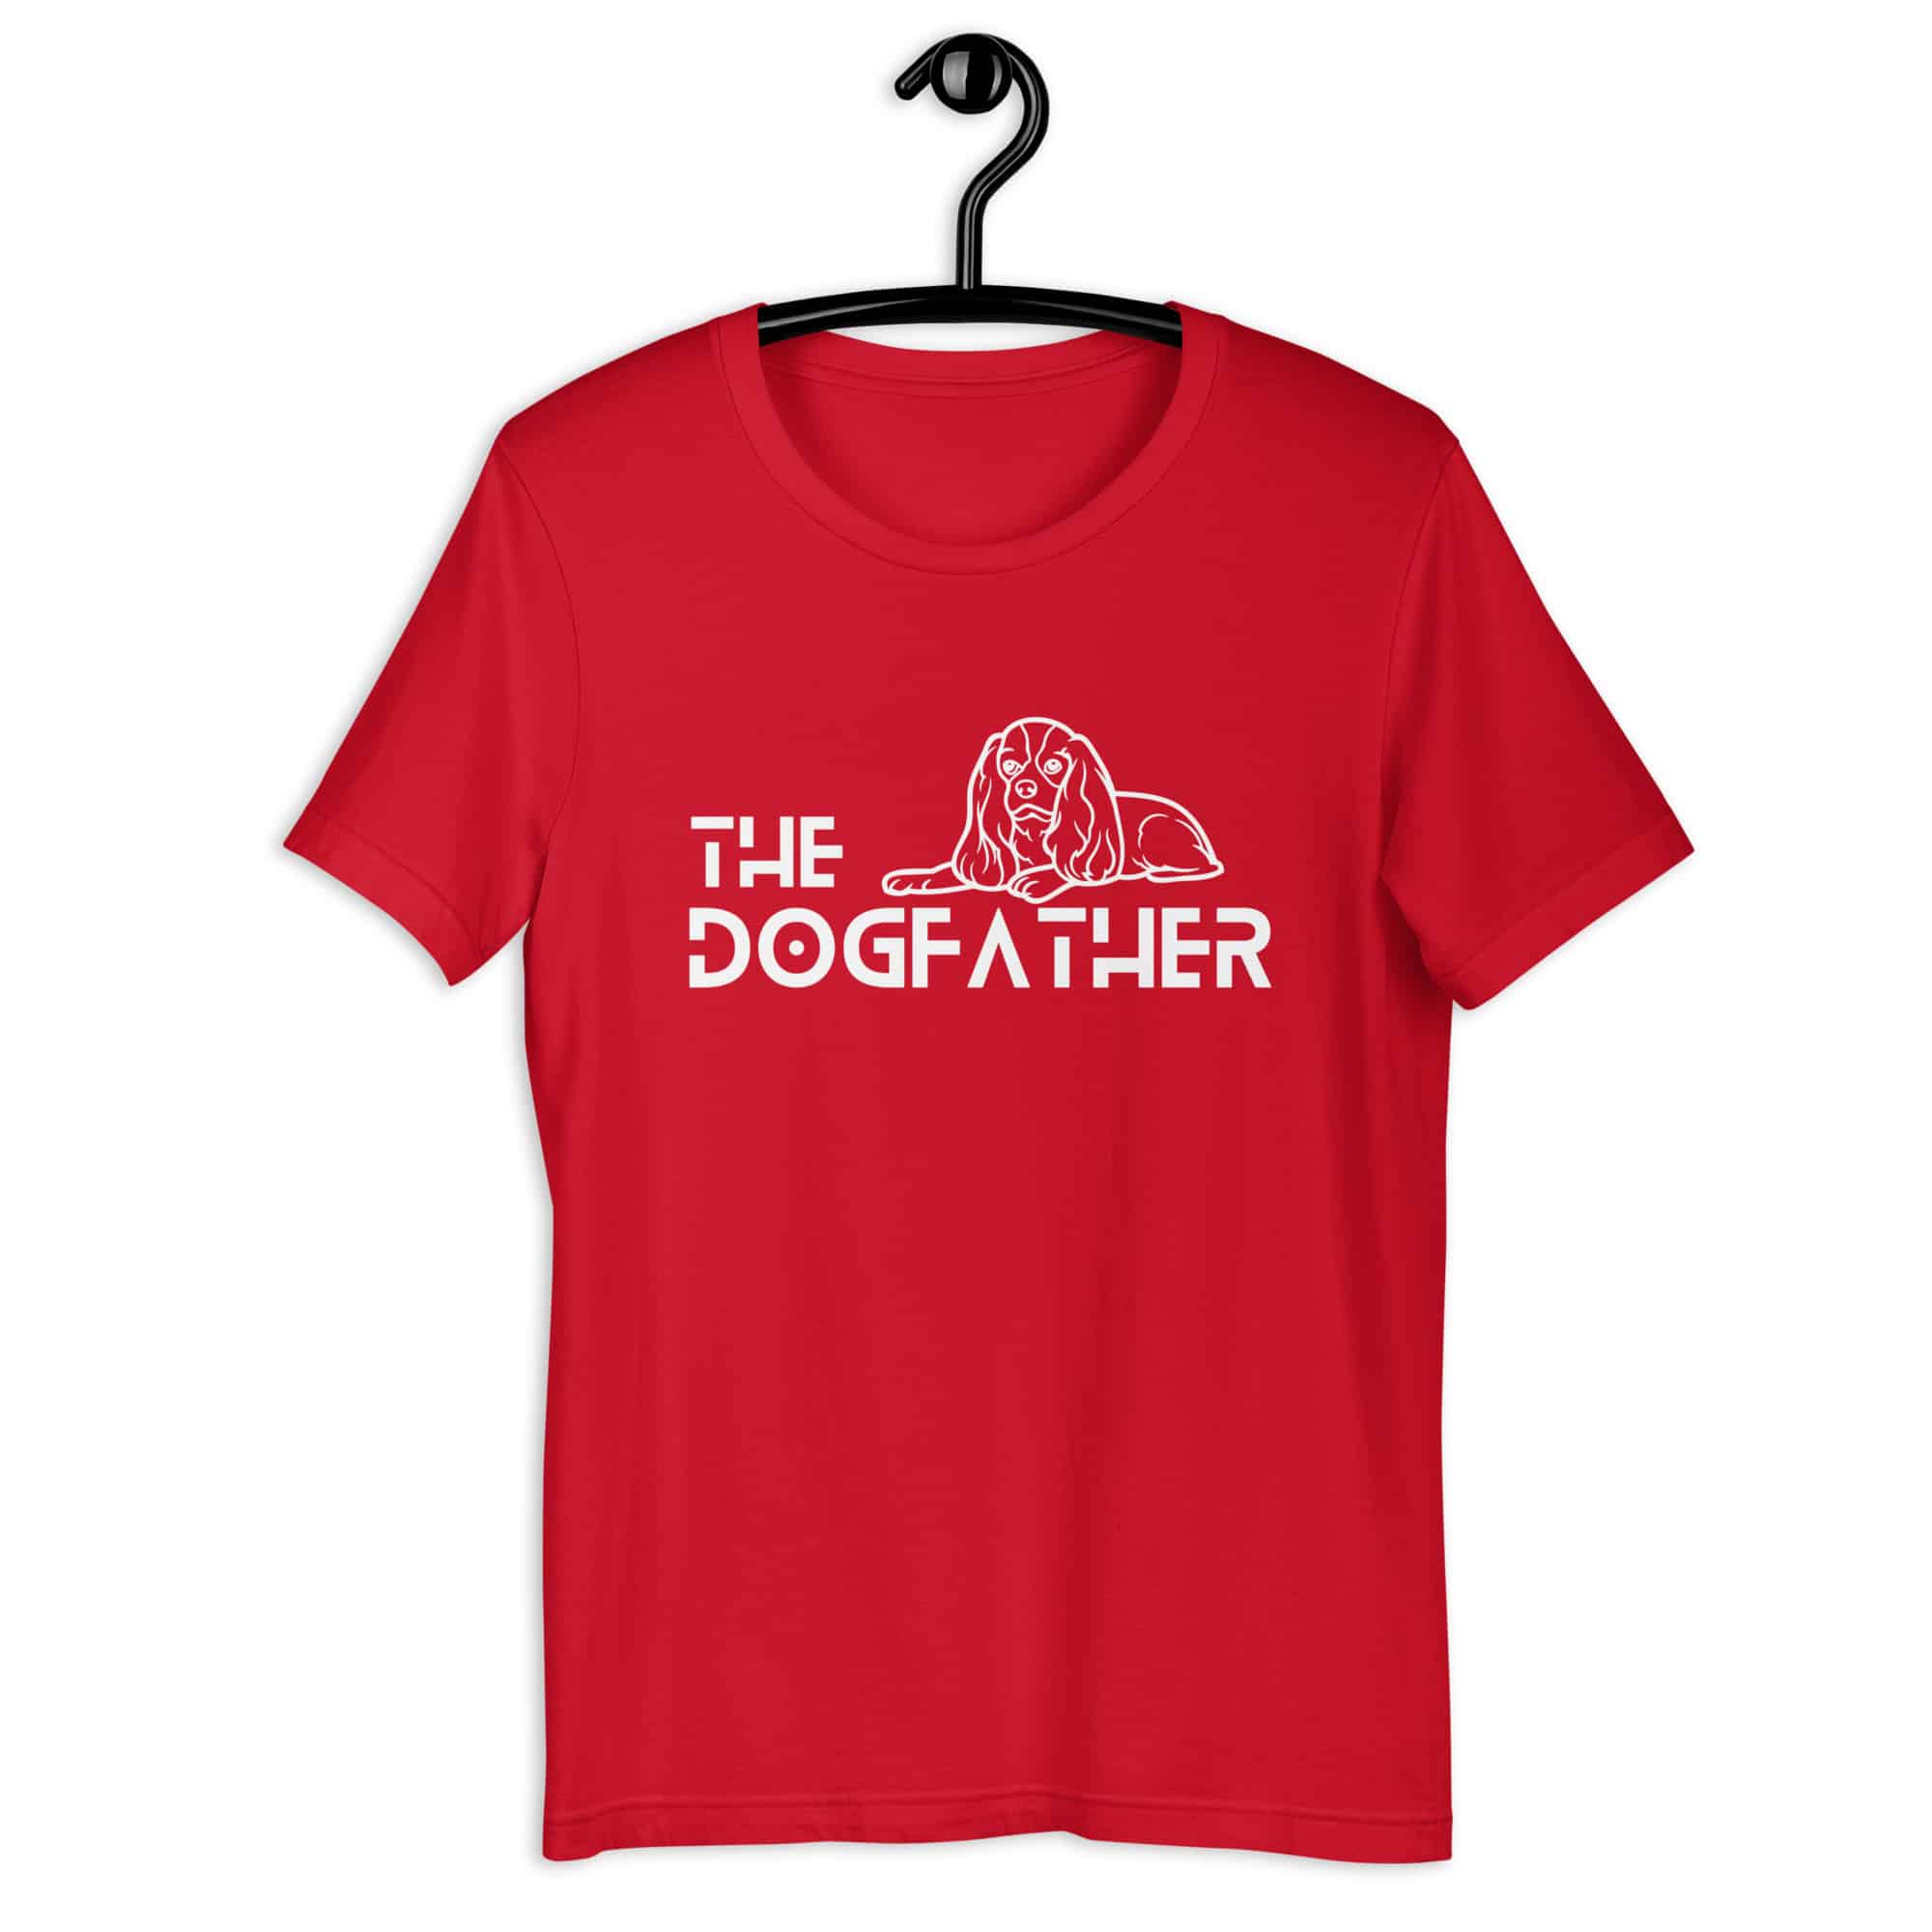 The Dogfather Hounds Unisex T-Shirt. Red